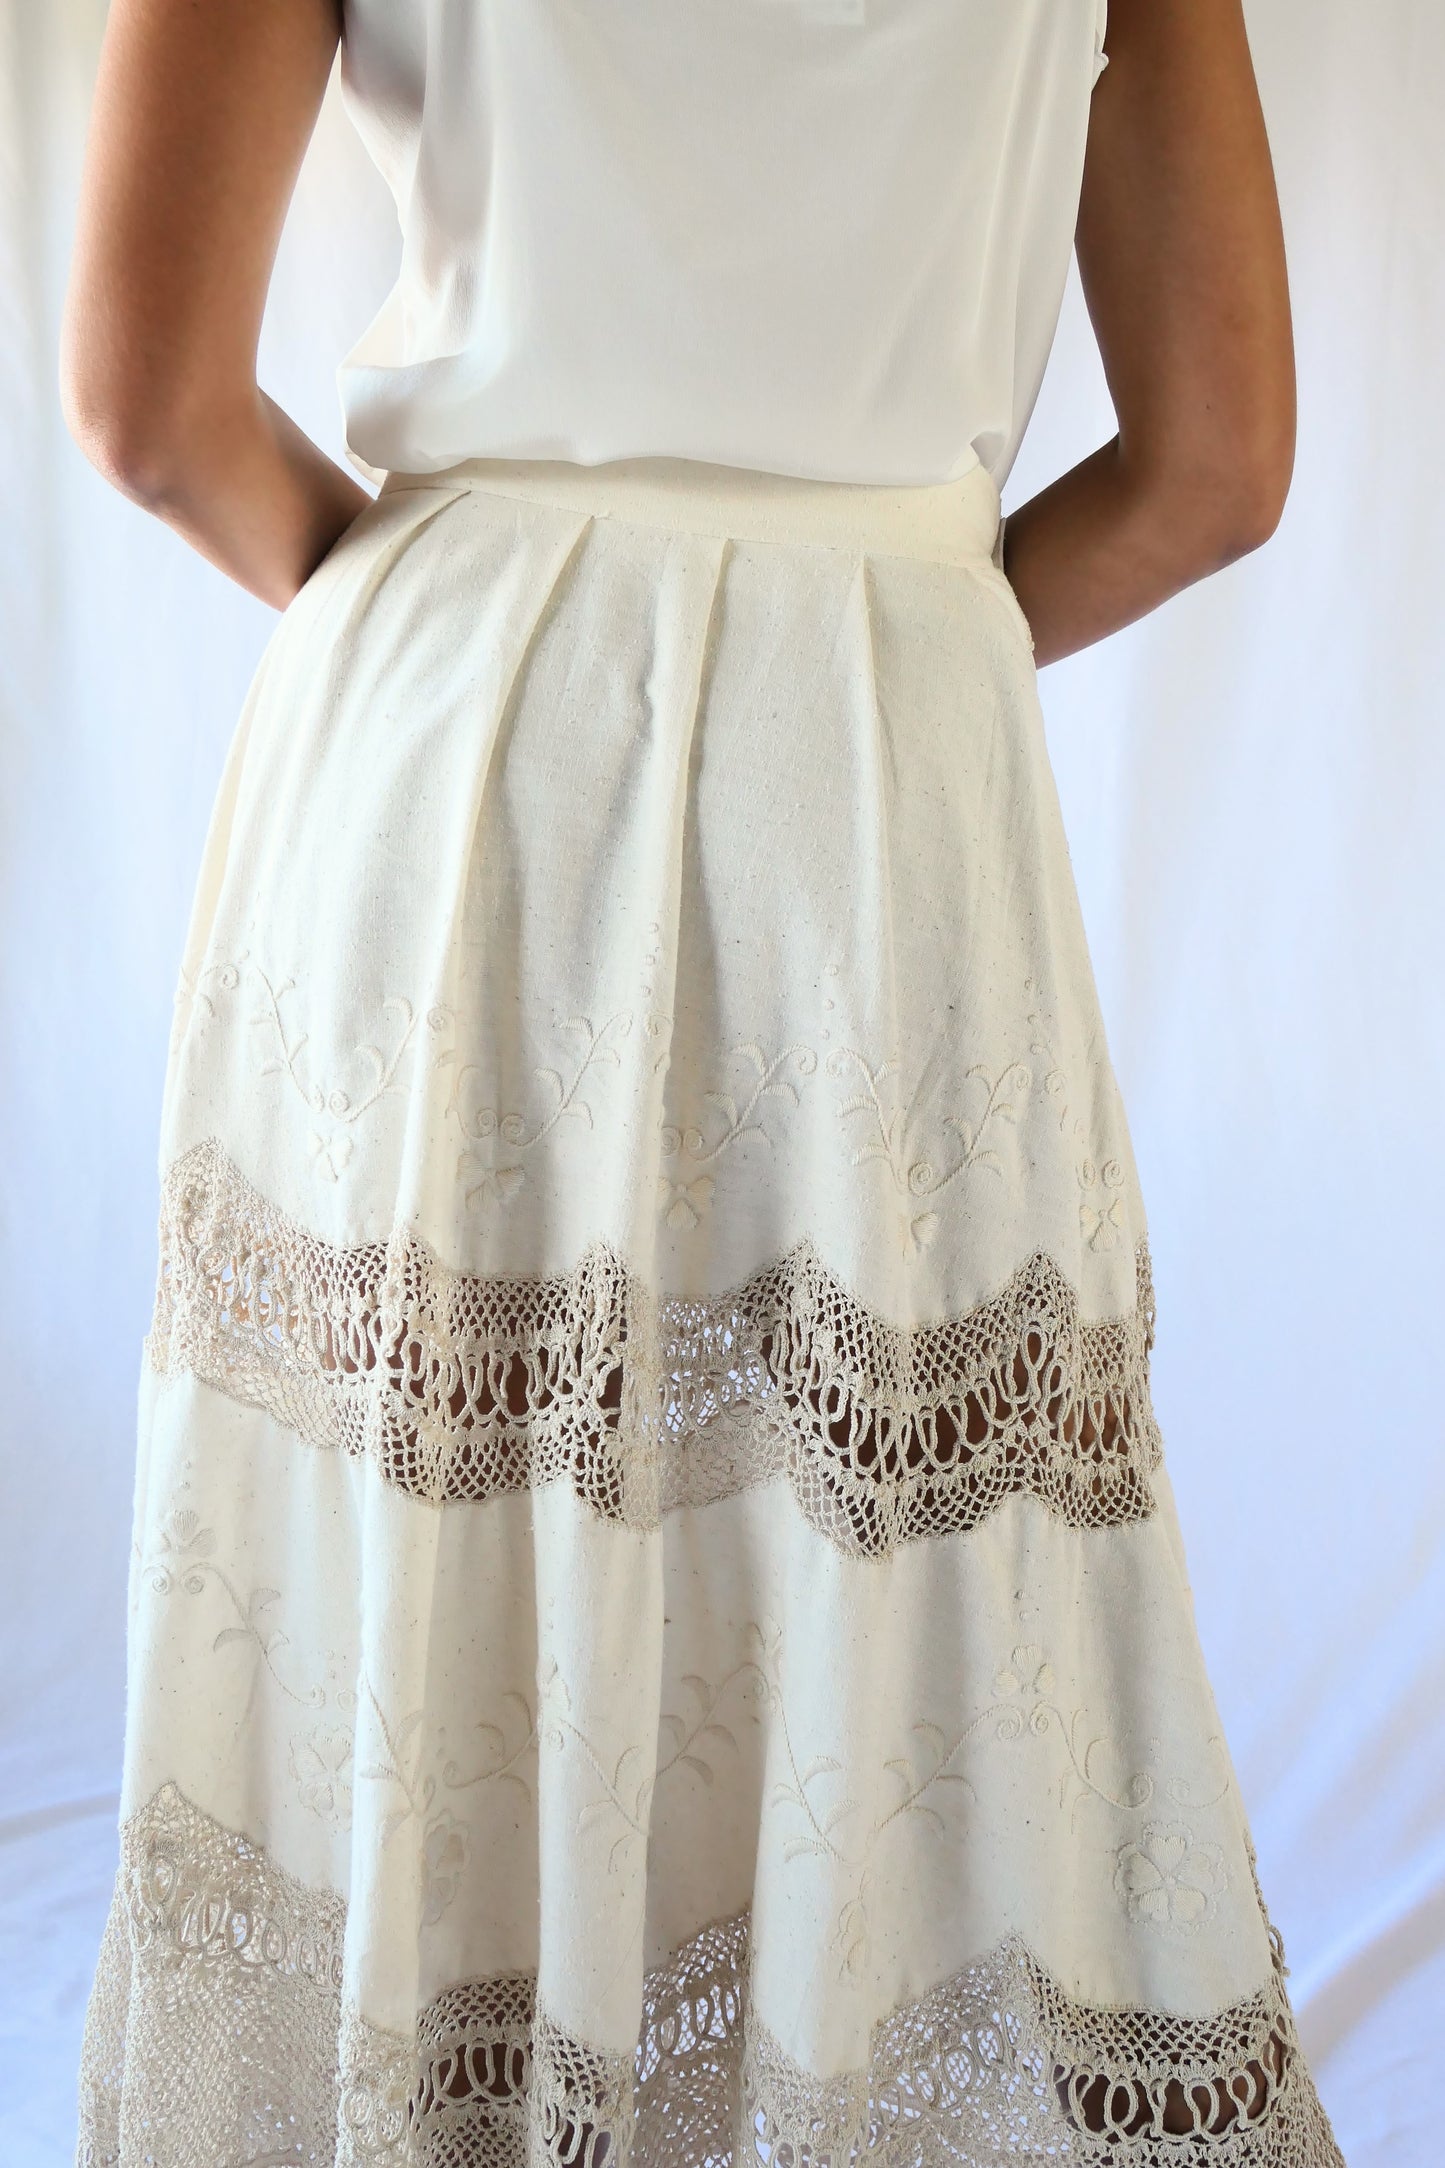 Picture yourself strolling through a sunlit Mediterranean village in this beautiful raw silk maxi skirt - an original Lim's skirt from the 1990s - with hand embroidered floral embellishments and hand crocheted trim. This skirt has a fitted, non-elastic waistband and is semi-pleated at the waist with three crochet buttons going up the side of the skirt. Measurements: Fits a size XS to Small Waist 26" Skirt length 33", hip 50" Color: Natural Material: Raw silk and cotton